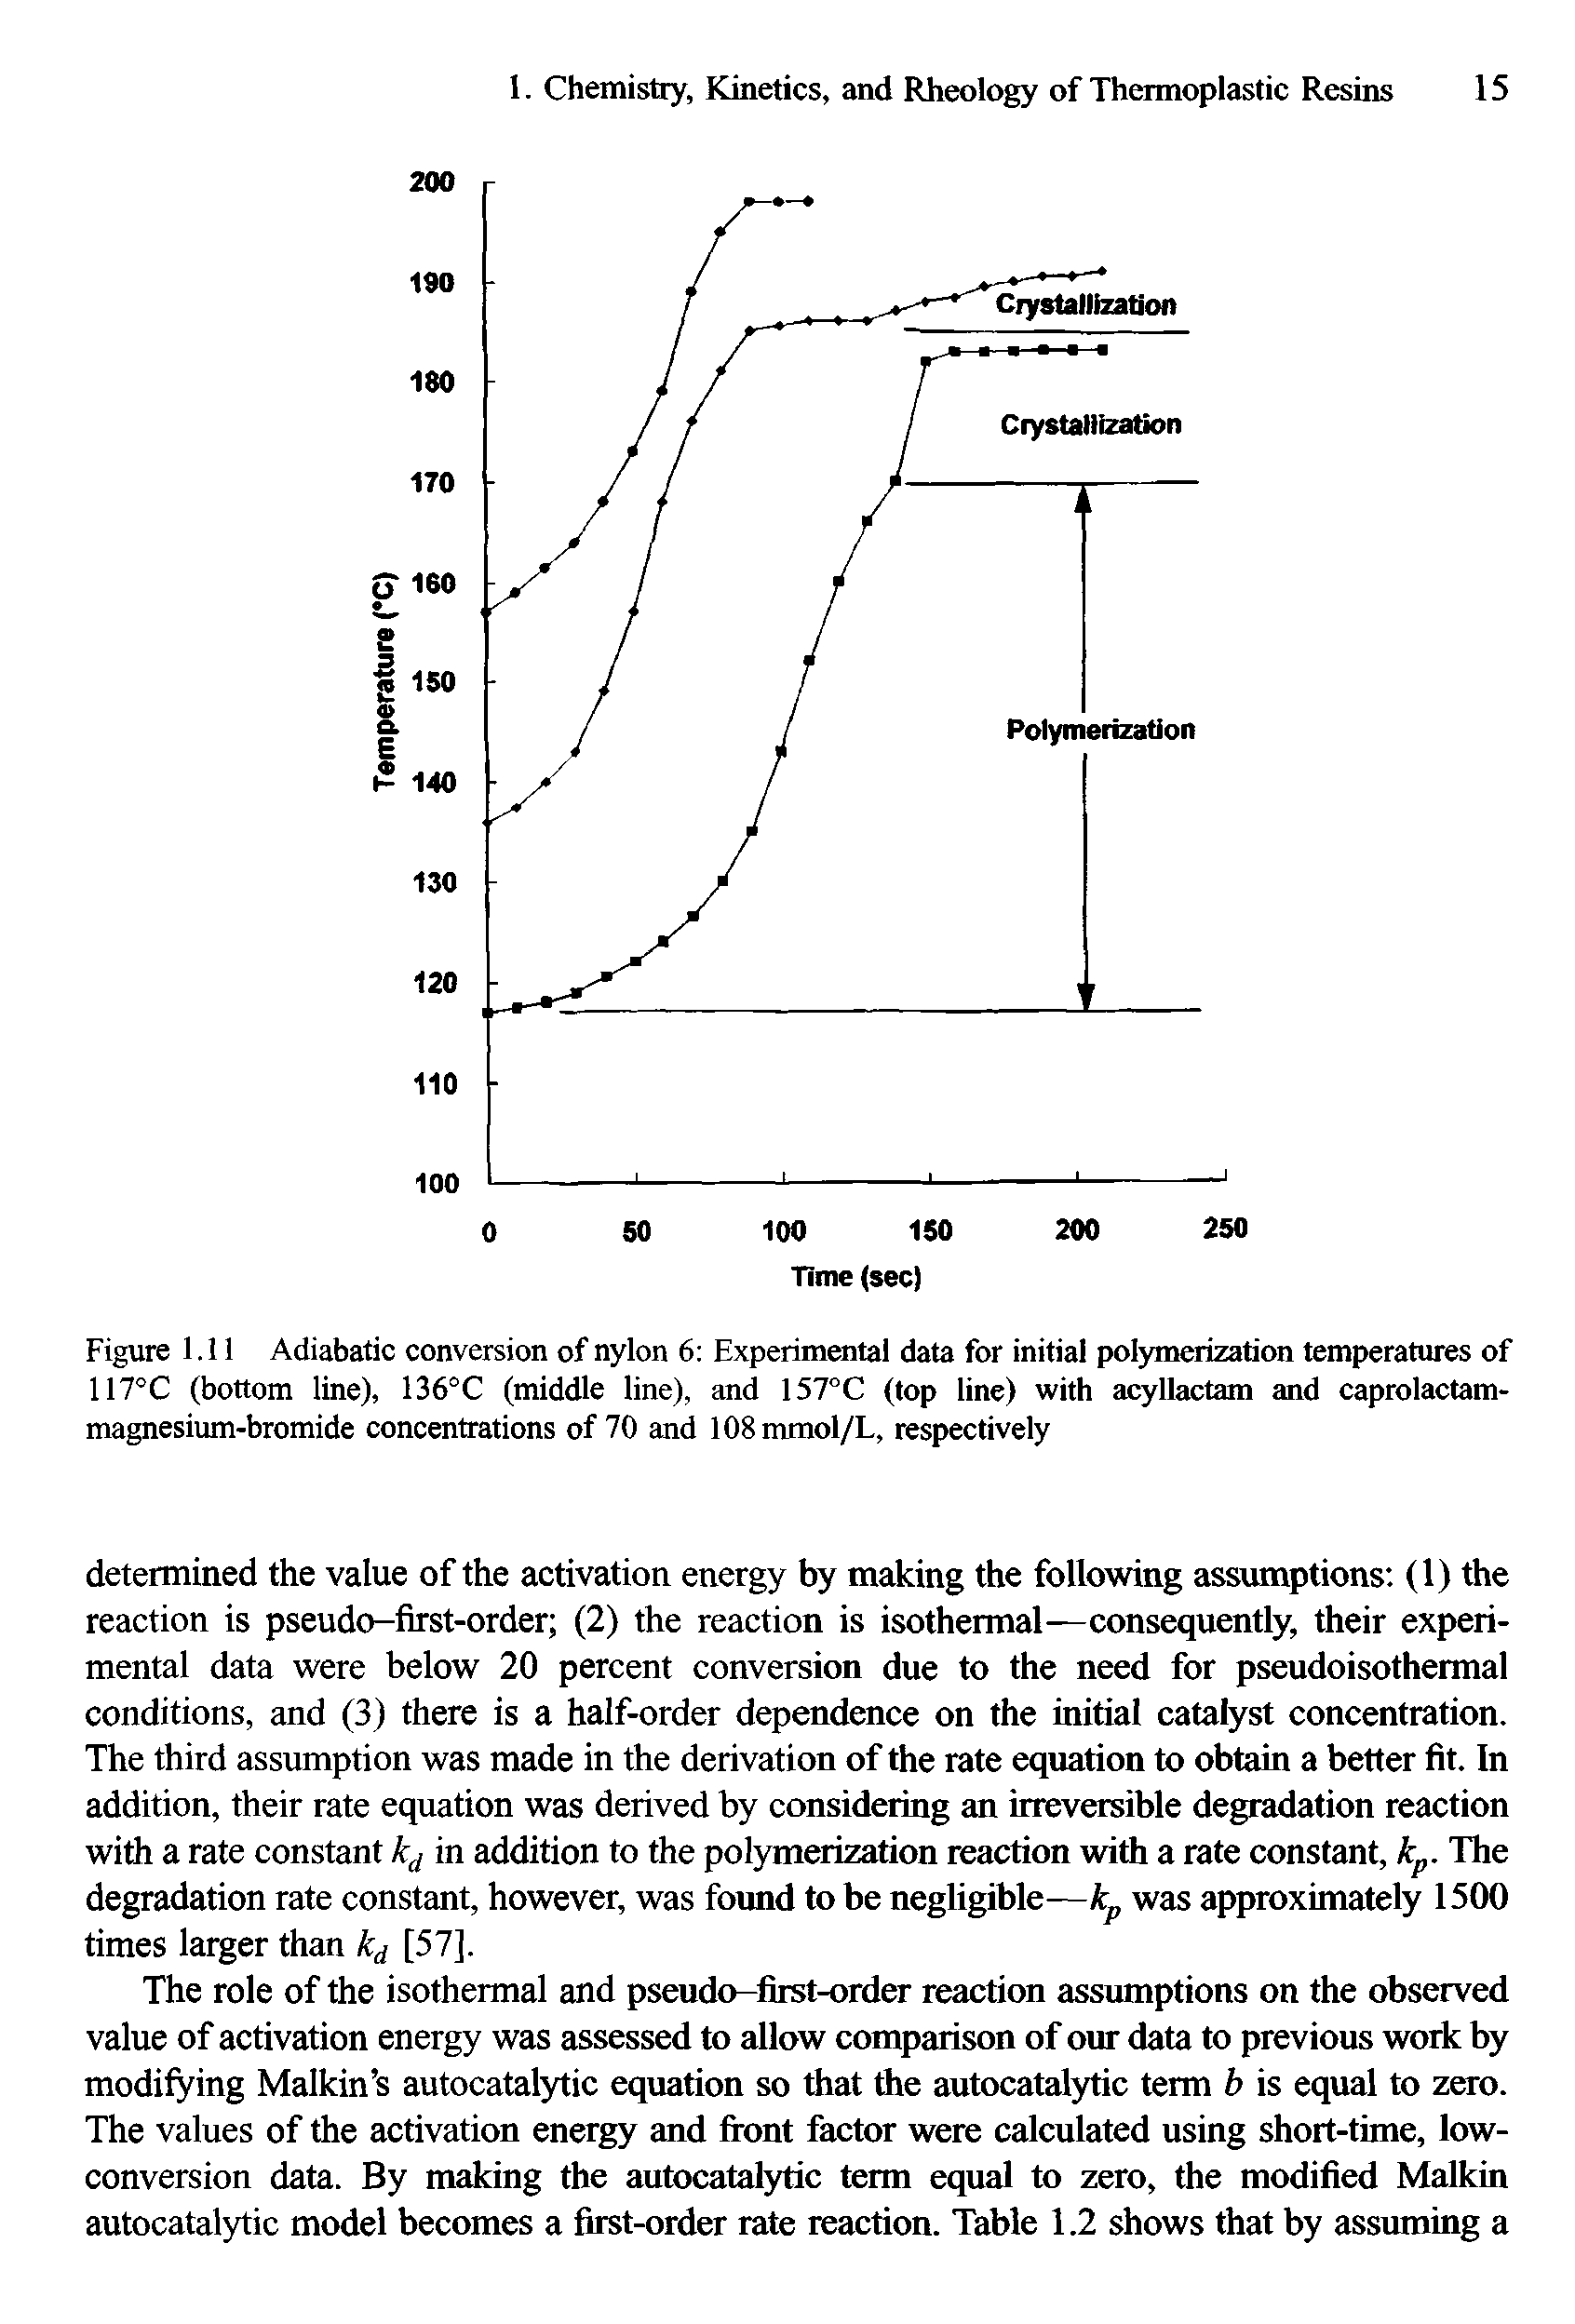 Figure 1.11 Adiabatic conversion of nylon 6 Experimental data for initial polymerization temperatures of 117°C (bottom line), 136°C (middle line), and 157°C (top line) with acyllactam and caprolactam-magnesium-bromide concentrations of 70 and 108mmol/L, respectively...